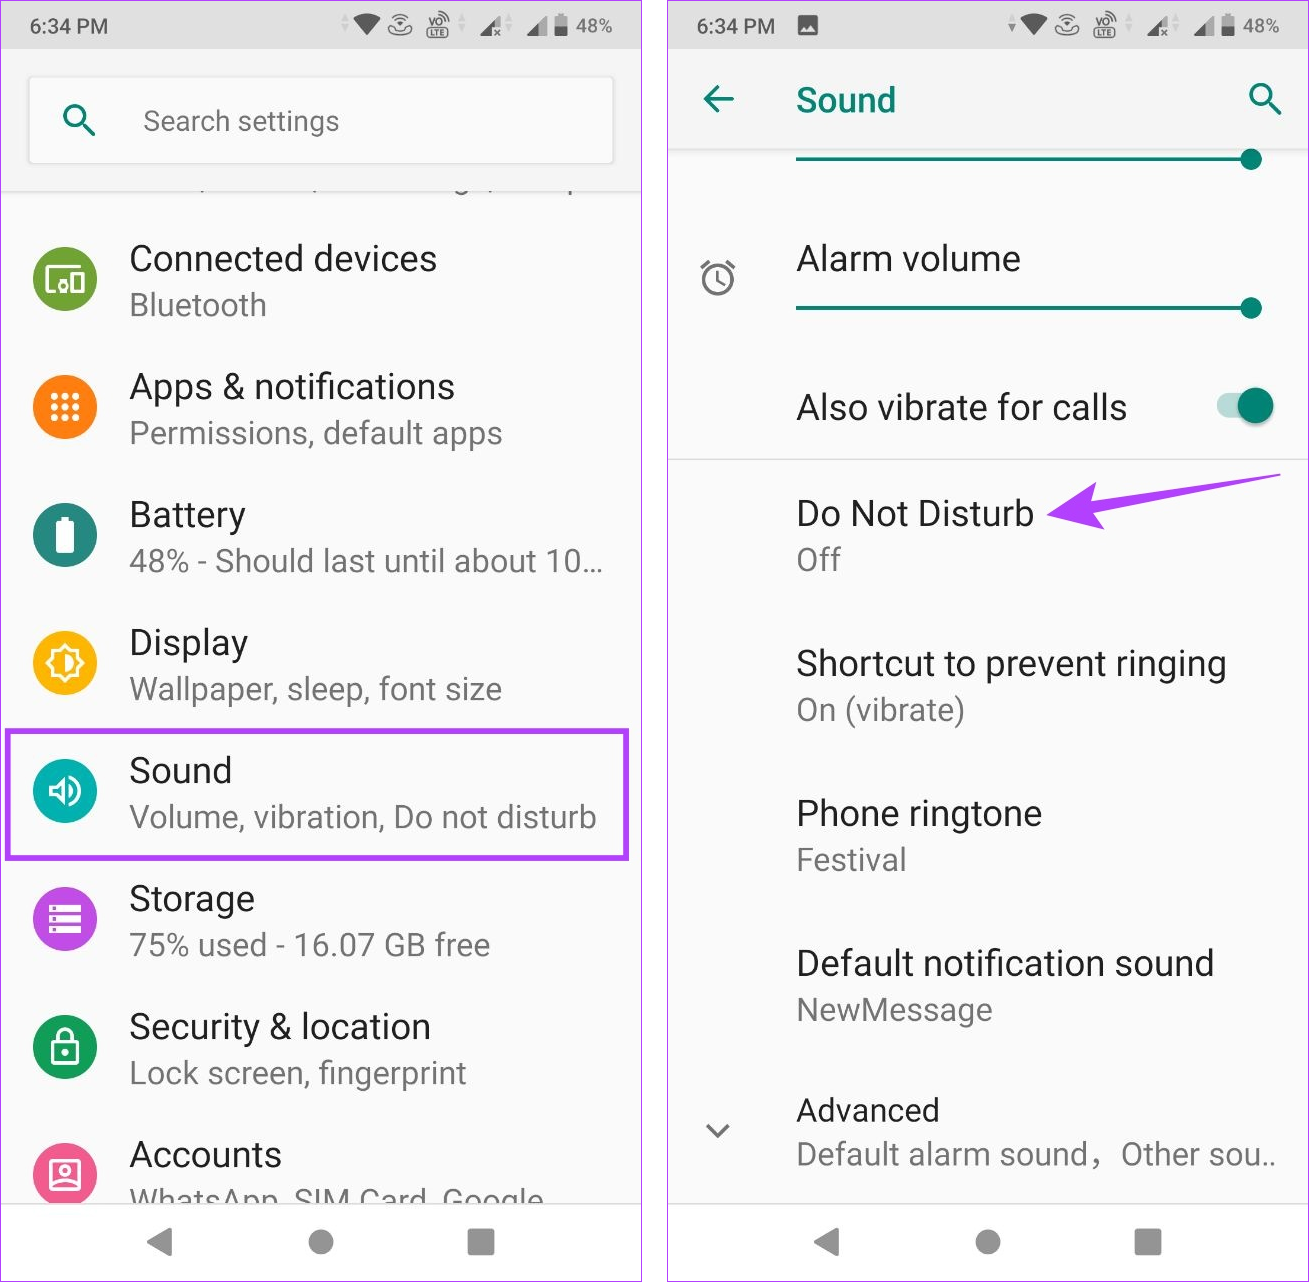 Open Sound settings on Android